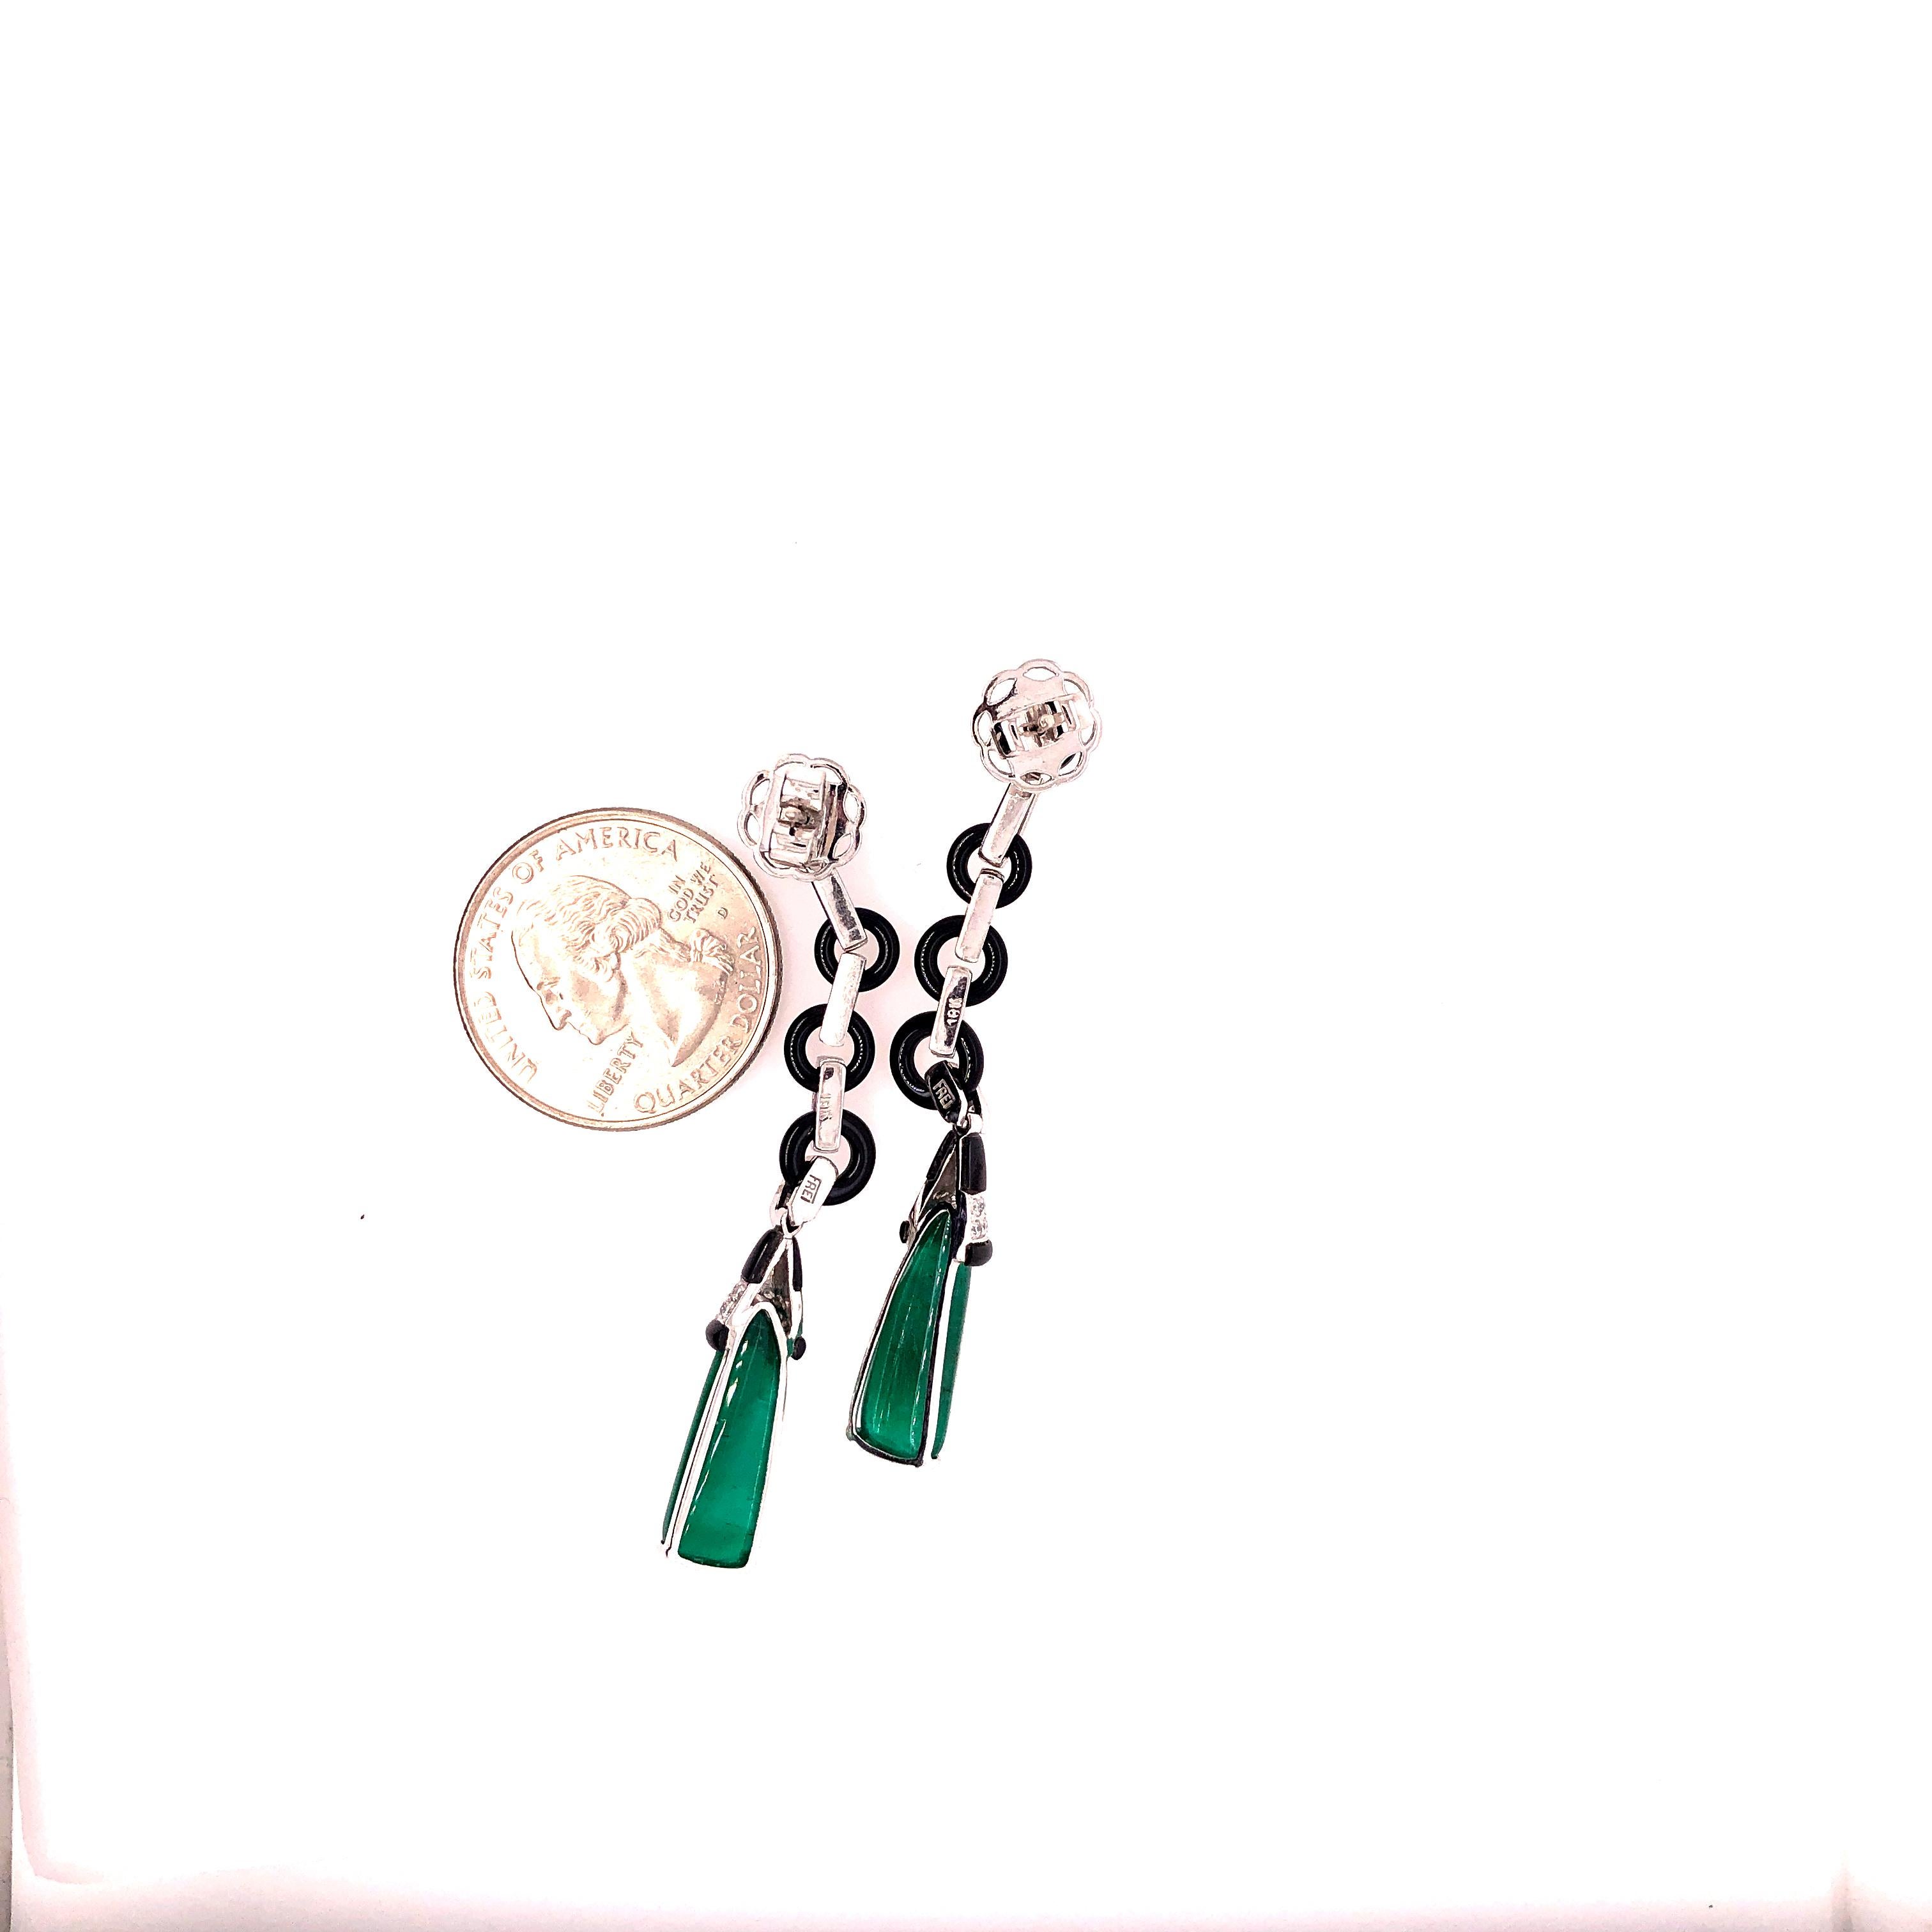 Eli Frei 18 K White Gold Cabochon Cut Emerald with Onyx and Diamond Links.  Stamped 750 and FREI.  